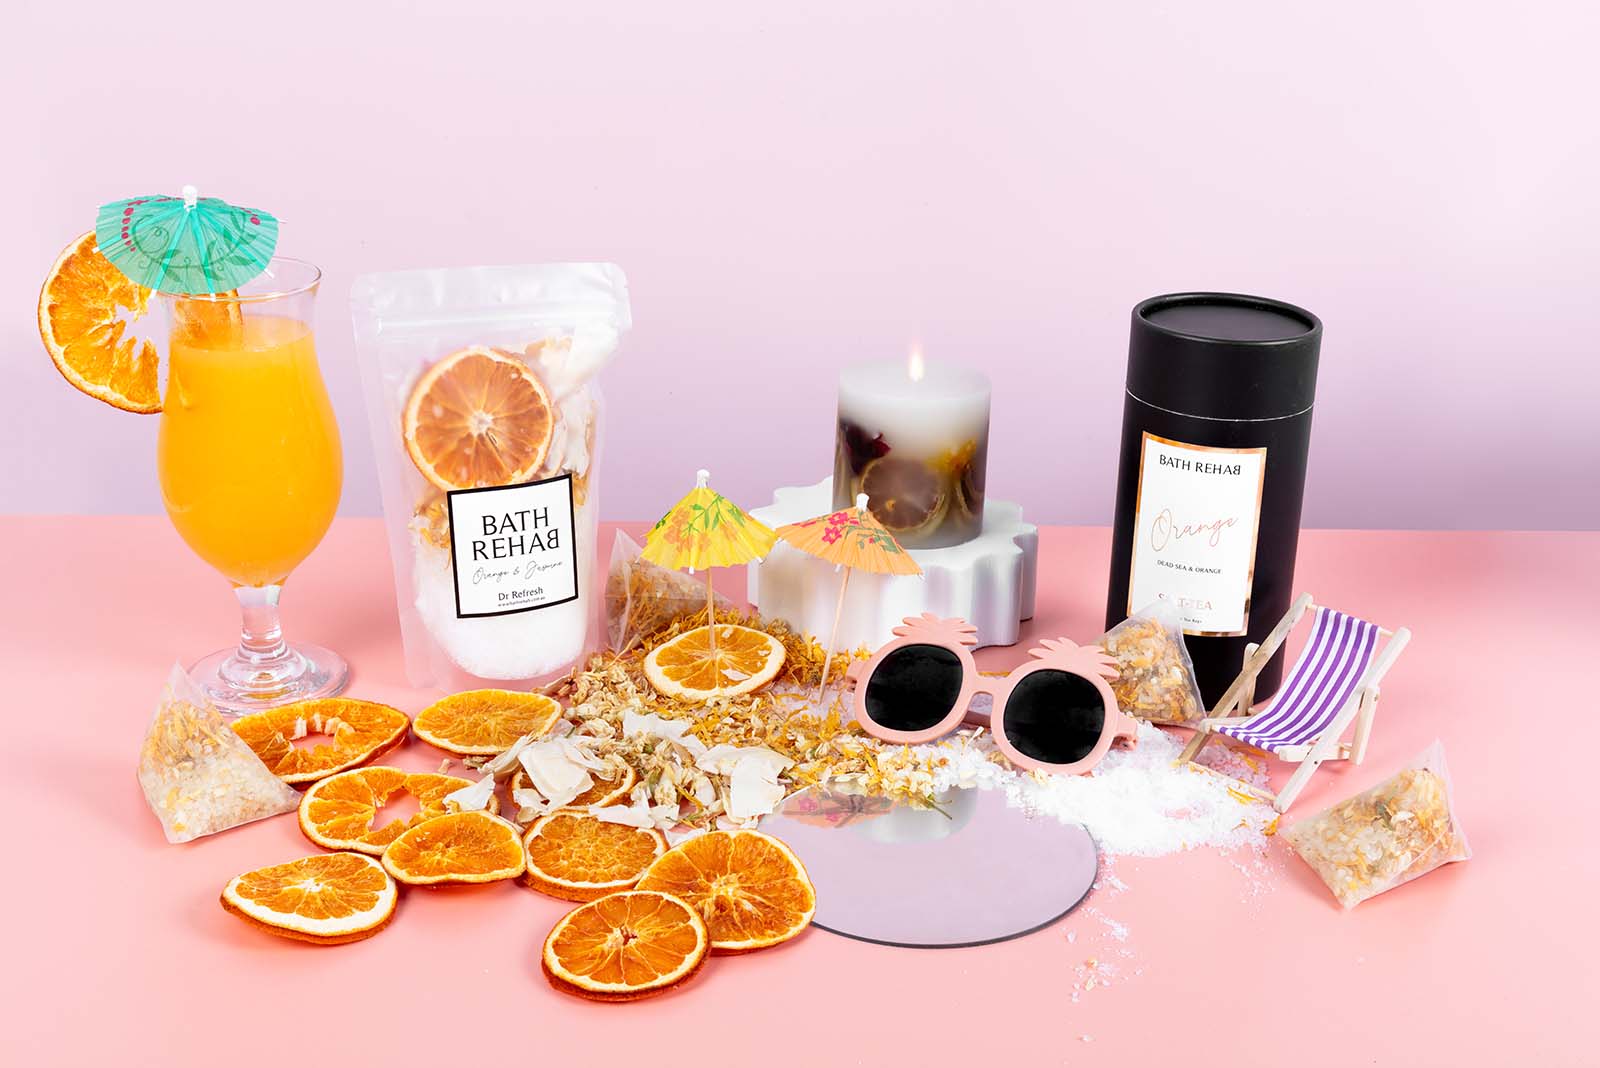 Fun Styled Images for a Bath Soak Brand Bath Rehab. Styled Product Photography by Megzie Makes